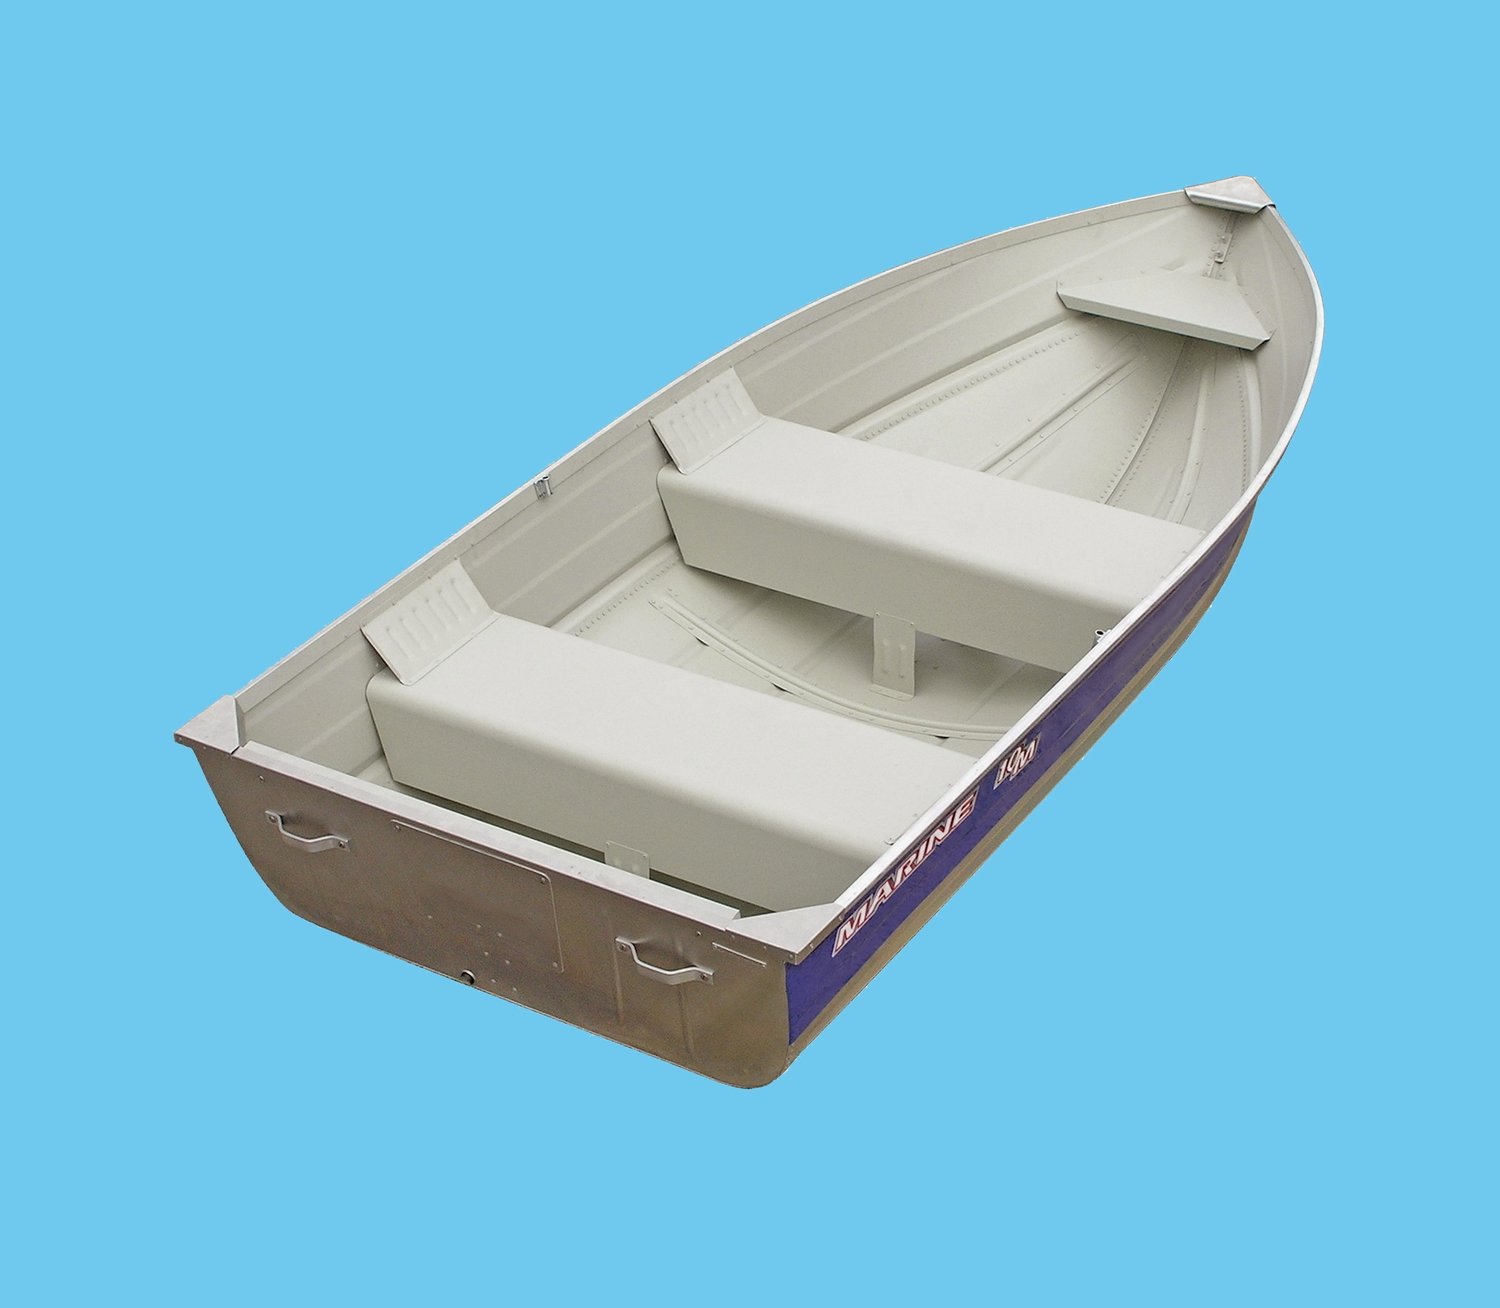 Marine Aluminium 10 m V Hull Ally Boat ~ Dinghy ~ Fishing CLICK FOR FURTHER PRICING